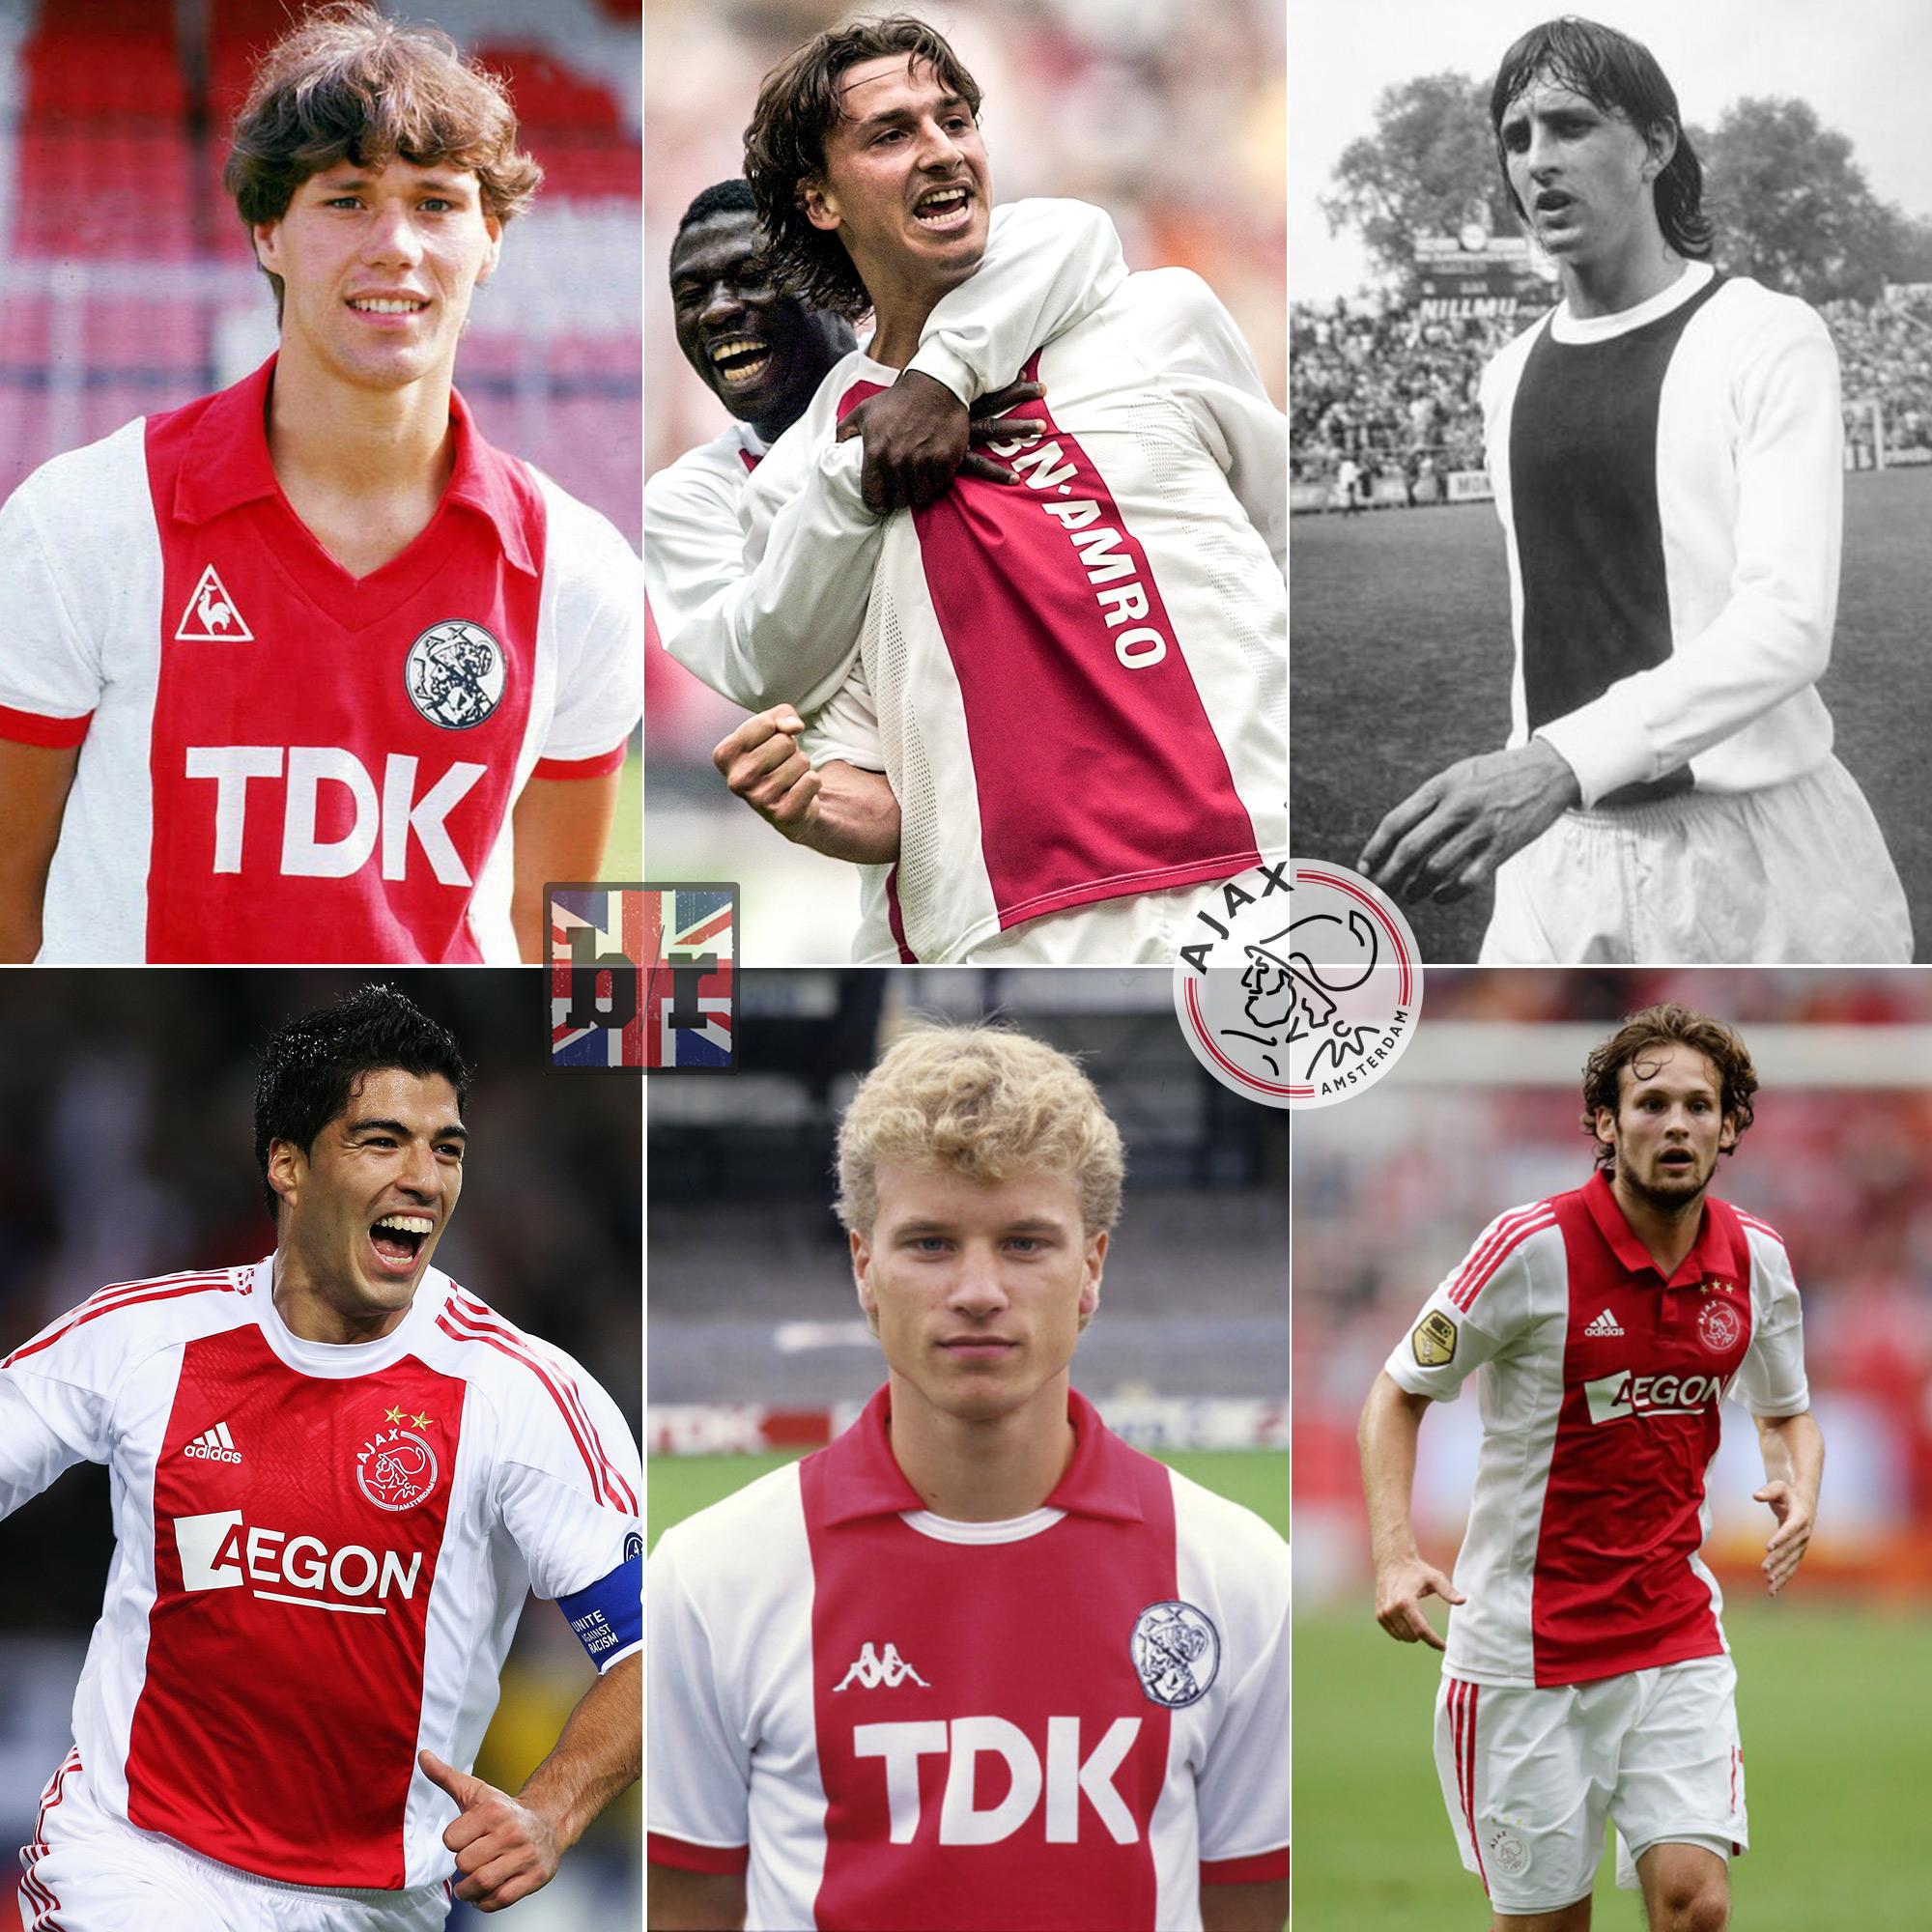   Happy Birthday to one of the world\s great football clubs. 
 Why is Daley Blind anywhere near this picture ?